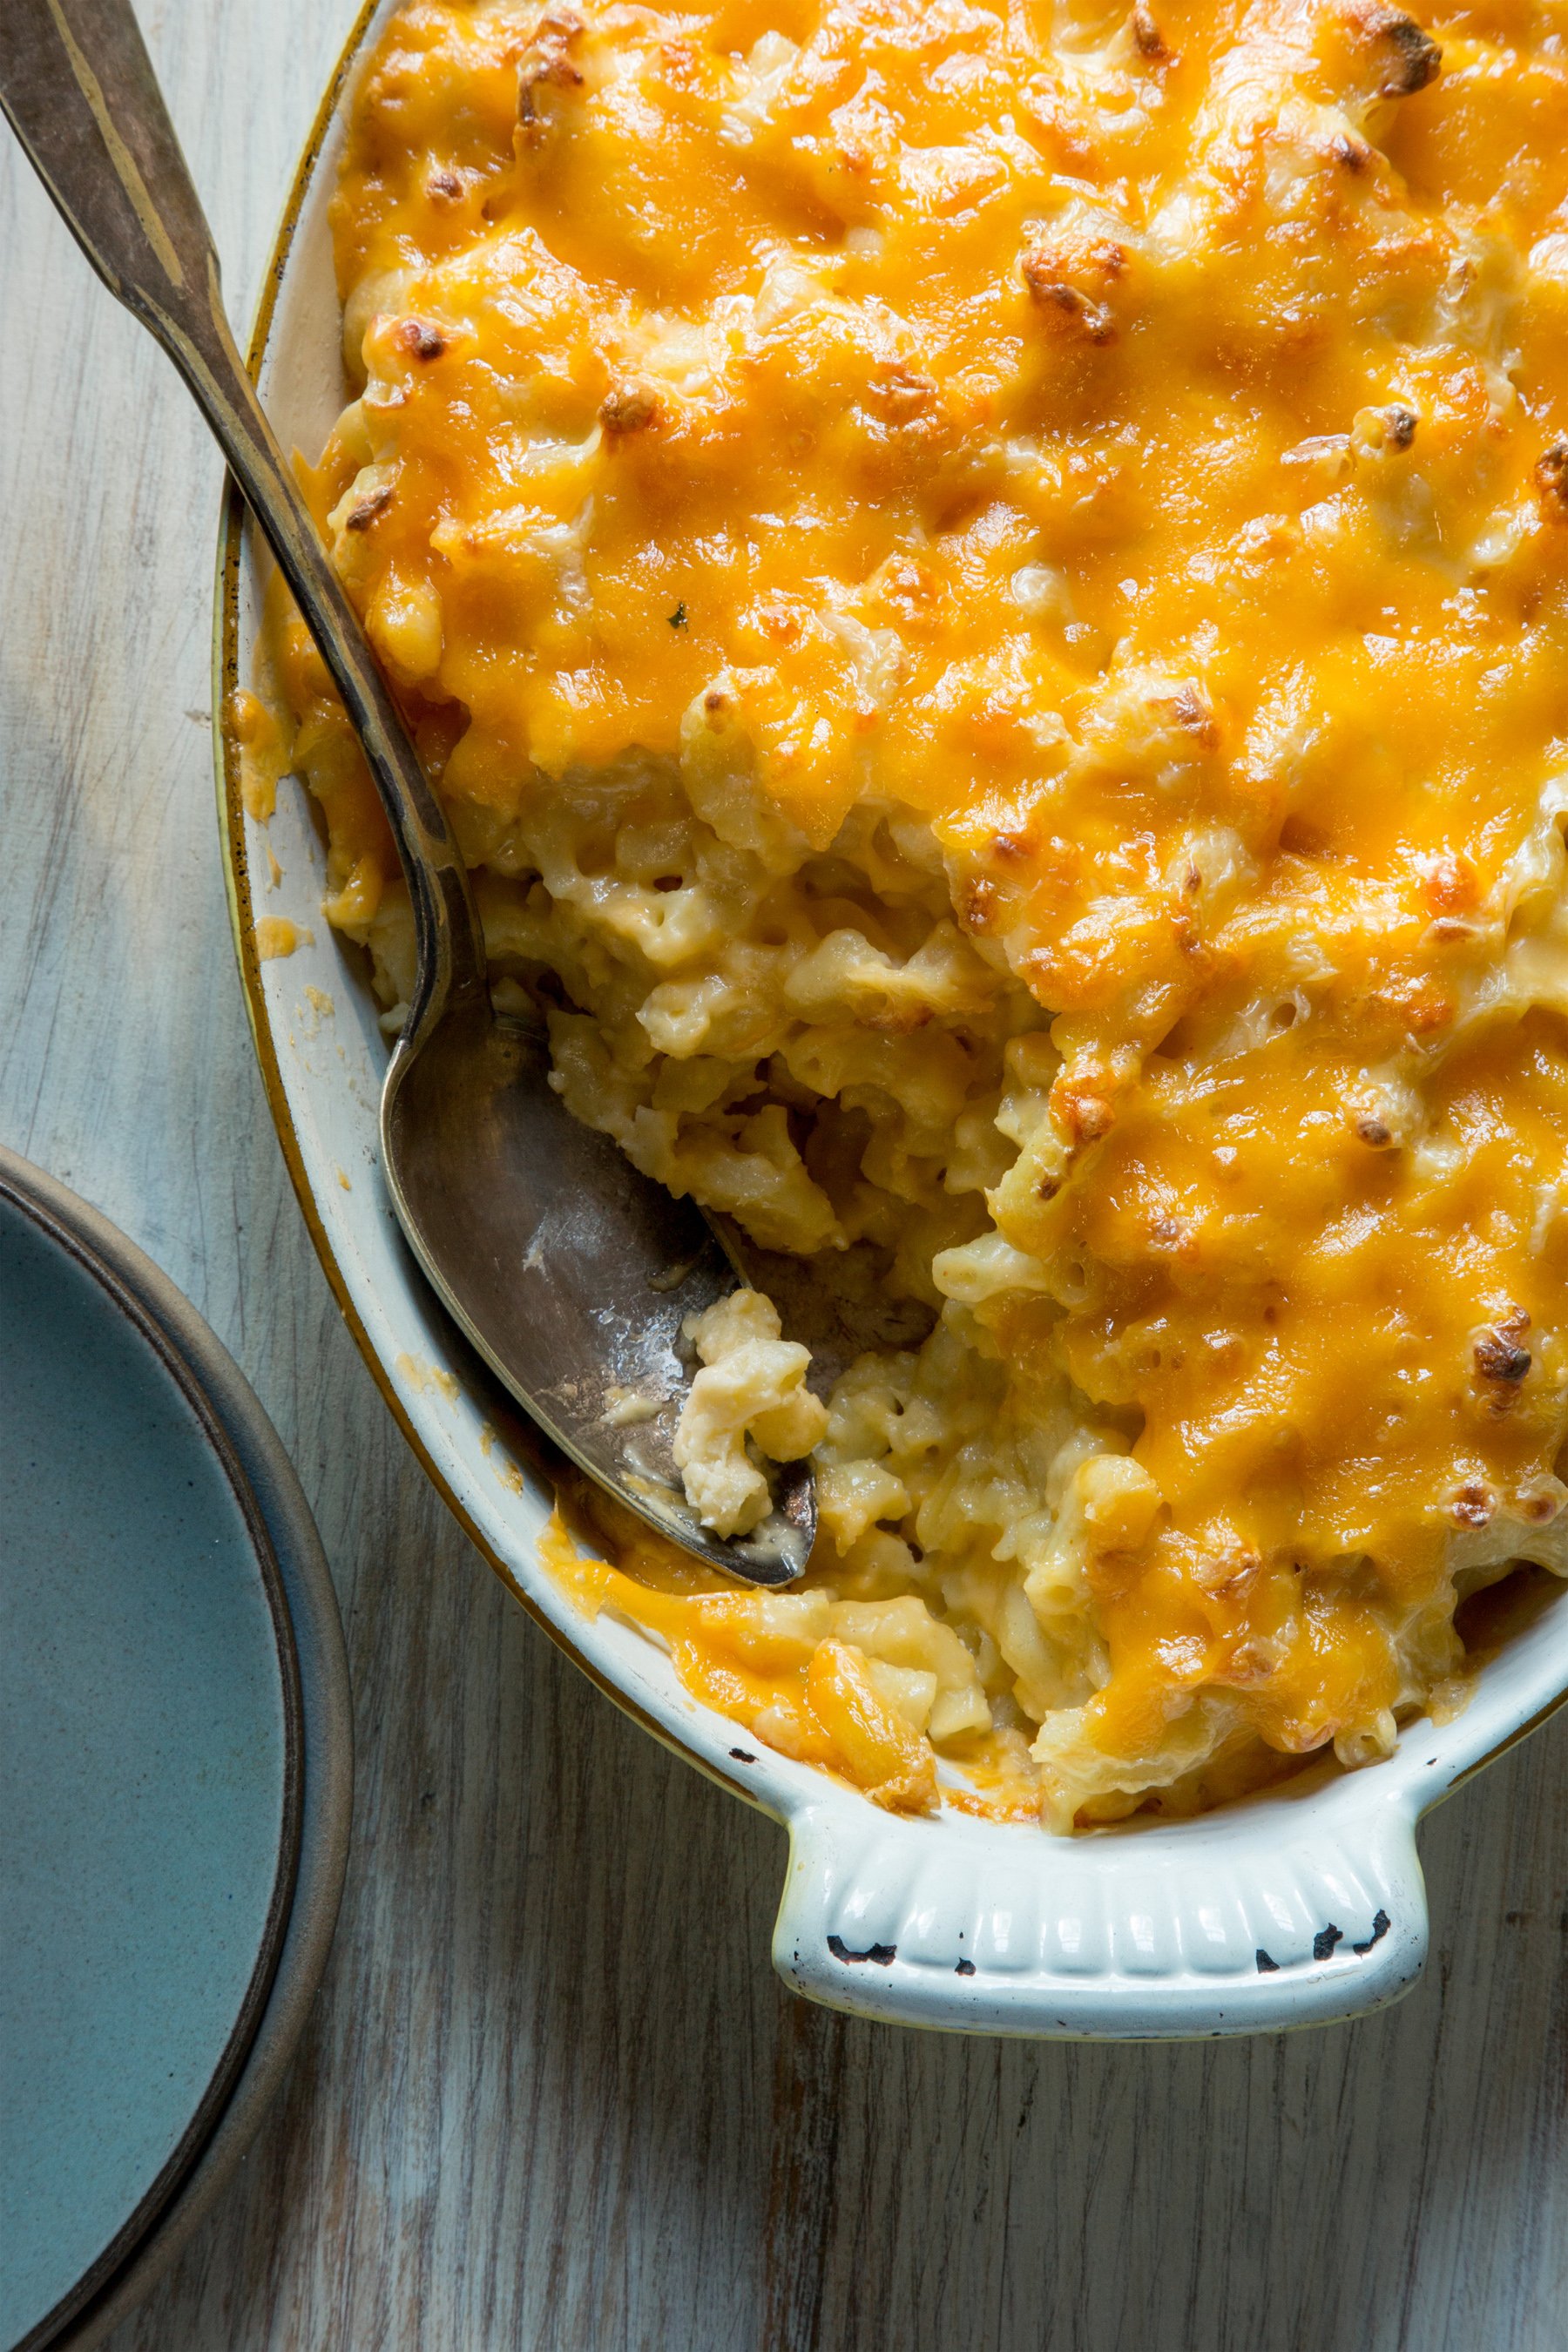 Baked Mac & Cheese. Photograph by Scott Suchman.